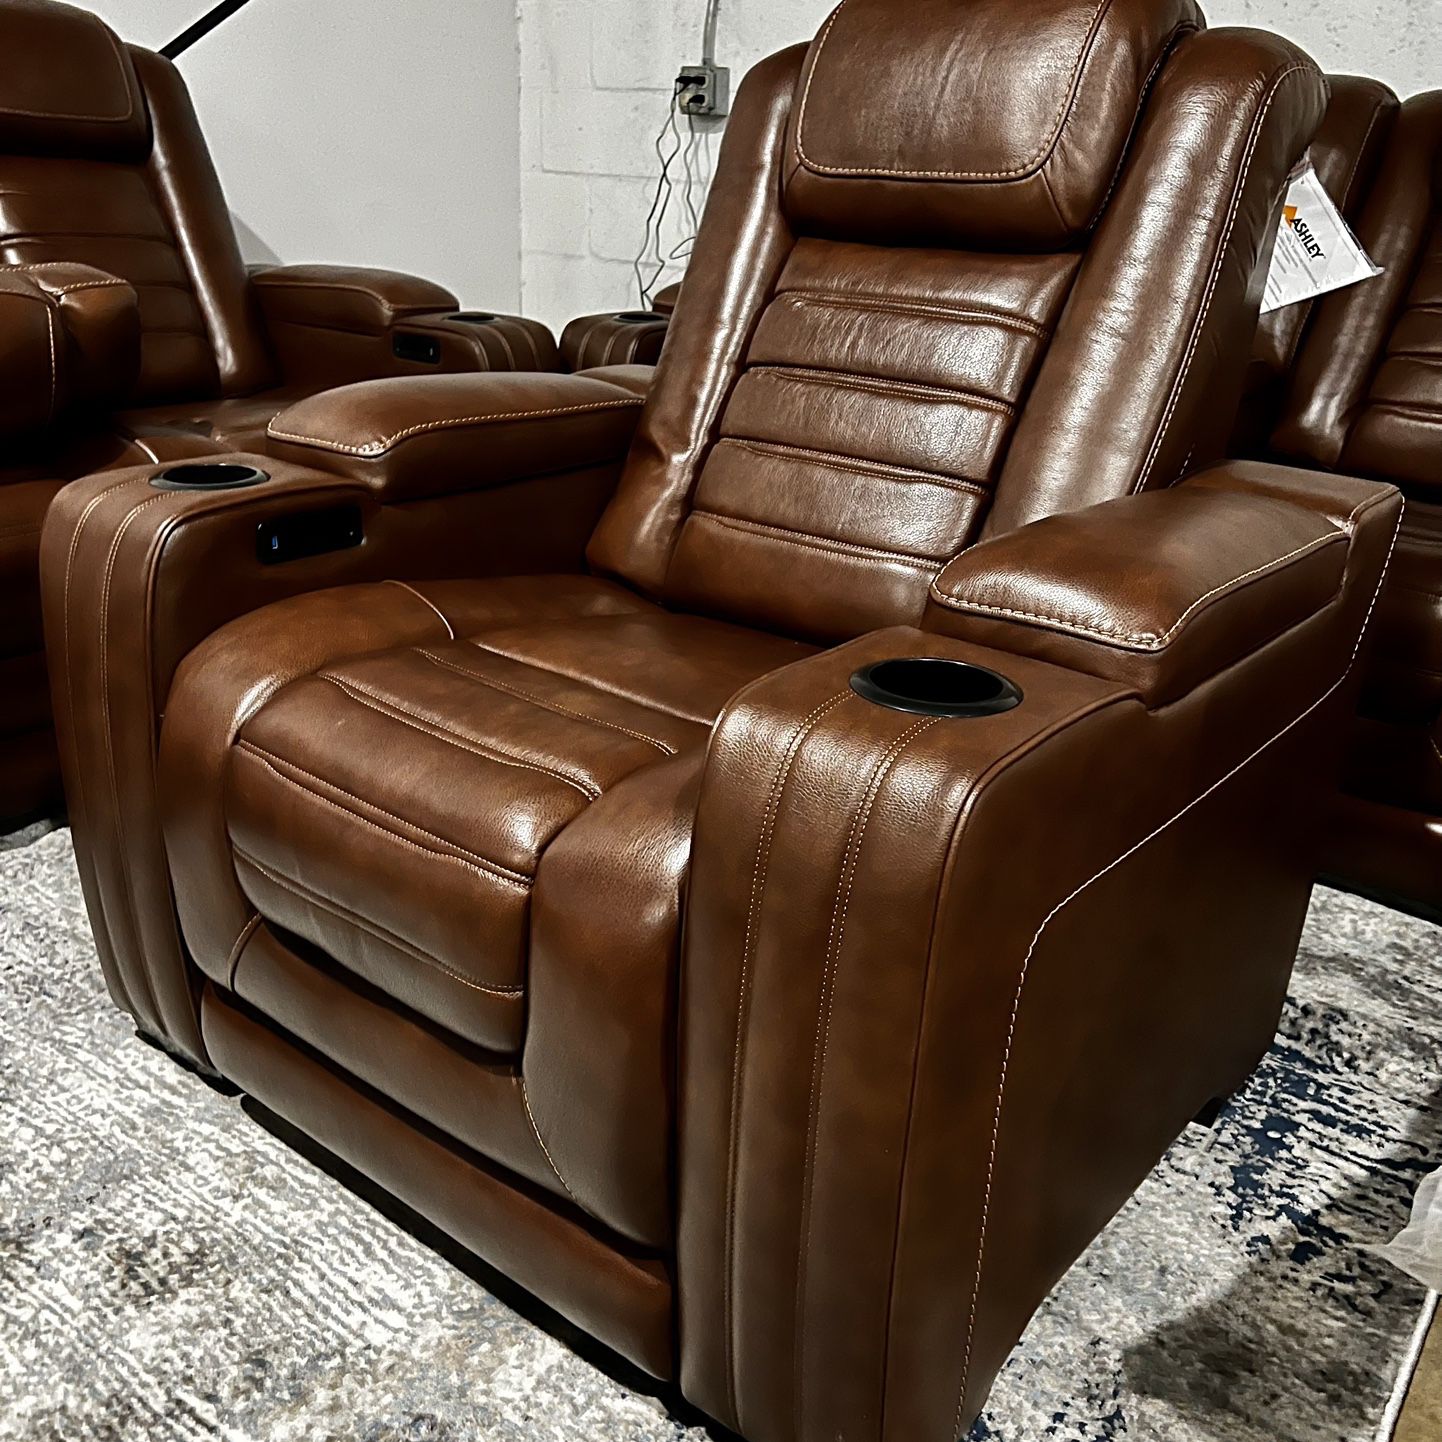 Brand New Luxury Power Recliner Chair With Massage And Heater. Retails For $2600 ( Our Price $799)